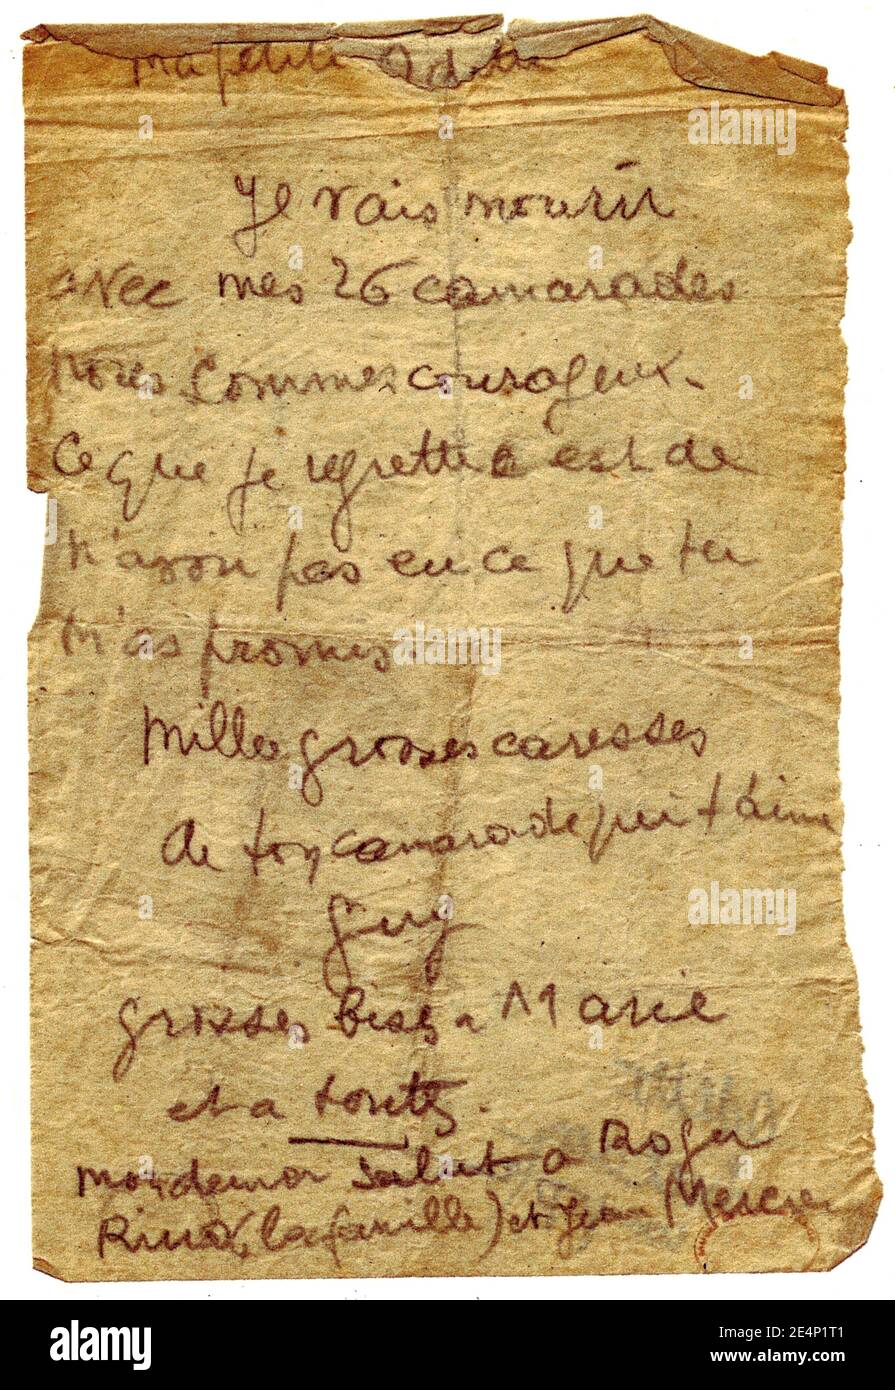 The letter Guy Moquet wrote to Odette Niles, his first and last love interest, before German army executes him on October 22, 1941, in Chateaubriant, west of France. Niles and Moquet, both were in the Resistance and arrested by French police during World War II, met each other in Choisel prison in Chateaubriant. Guy Moquet was executed with 26 french prisoners. He was 17 and has become one of the French Resistance symbol. Photo via ABACAPRESS.COM Stock Photo